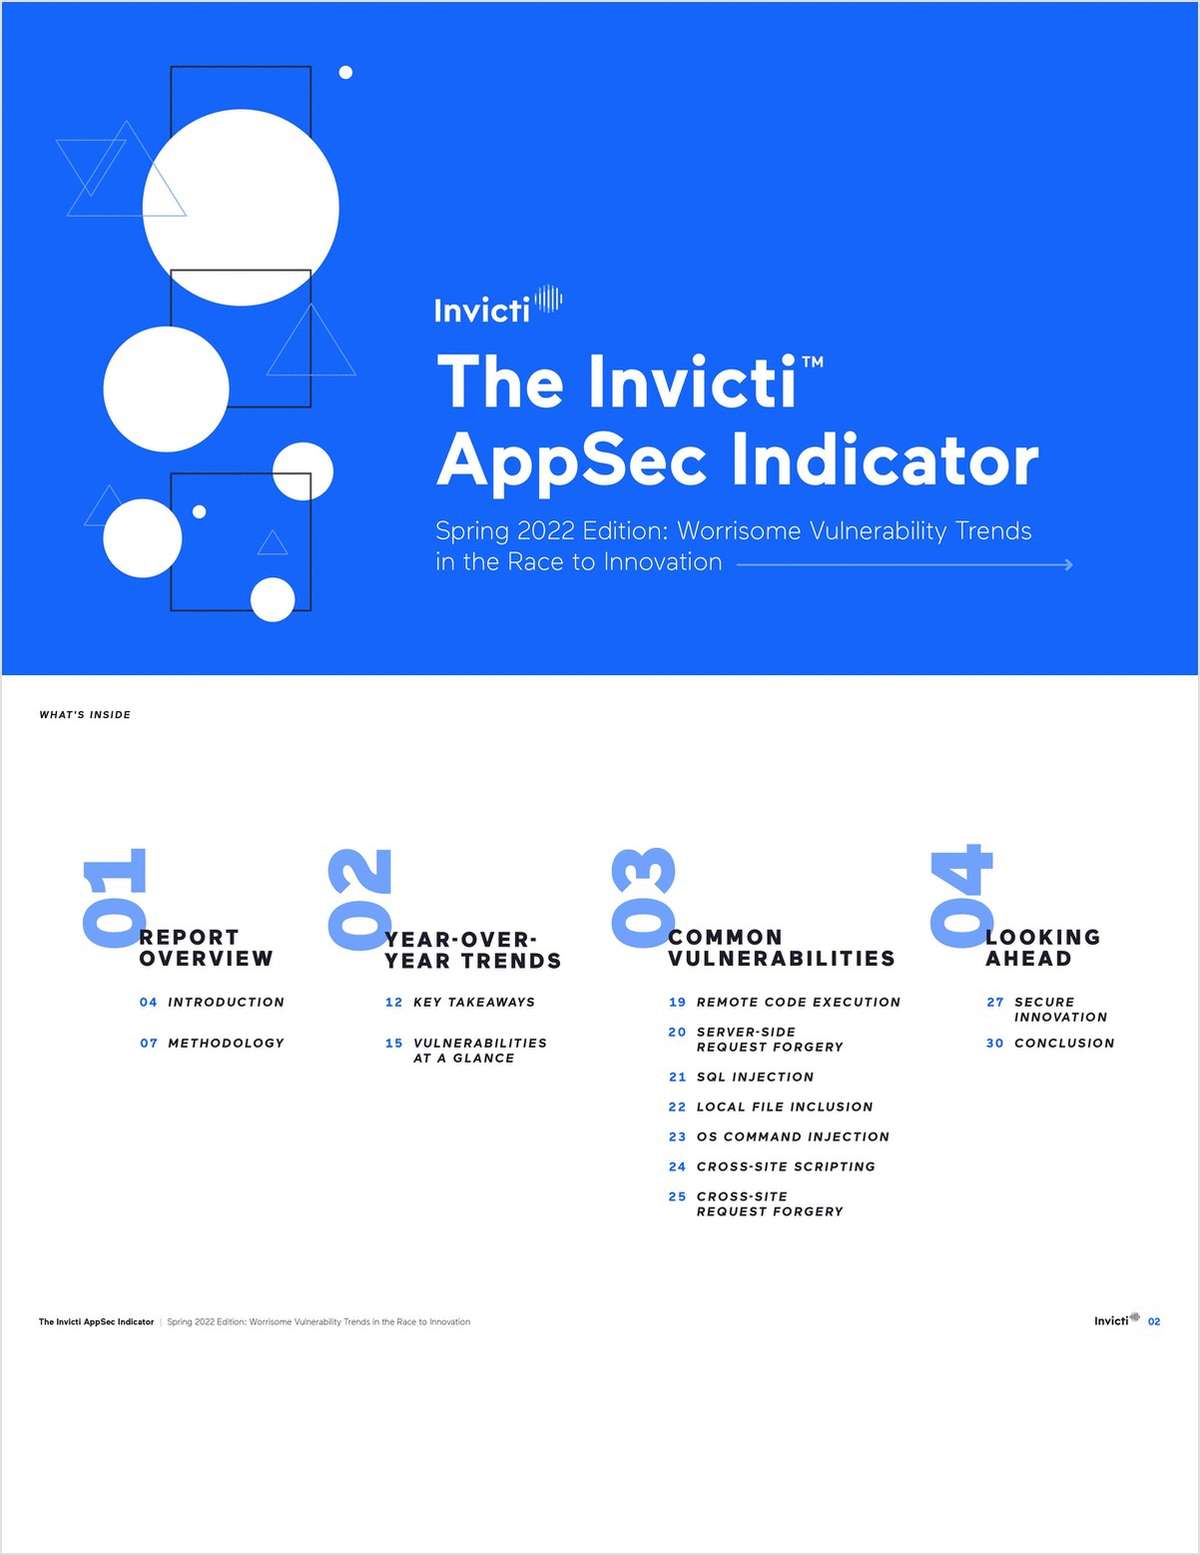 Invicti AppSec Indicator: Worrisome Vulnerability Trends in the Race to Innovation